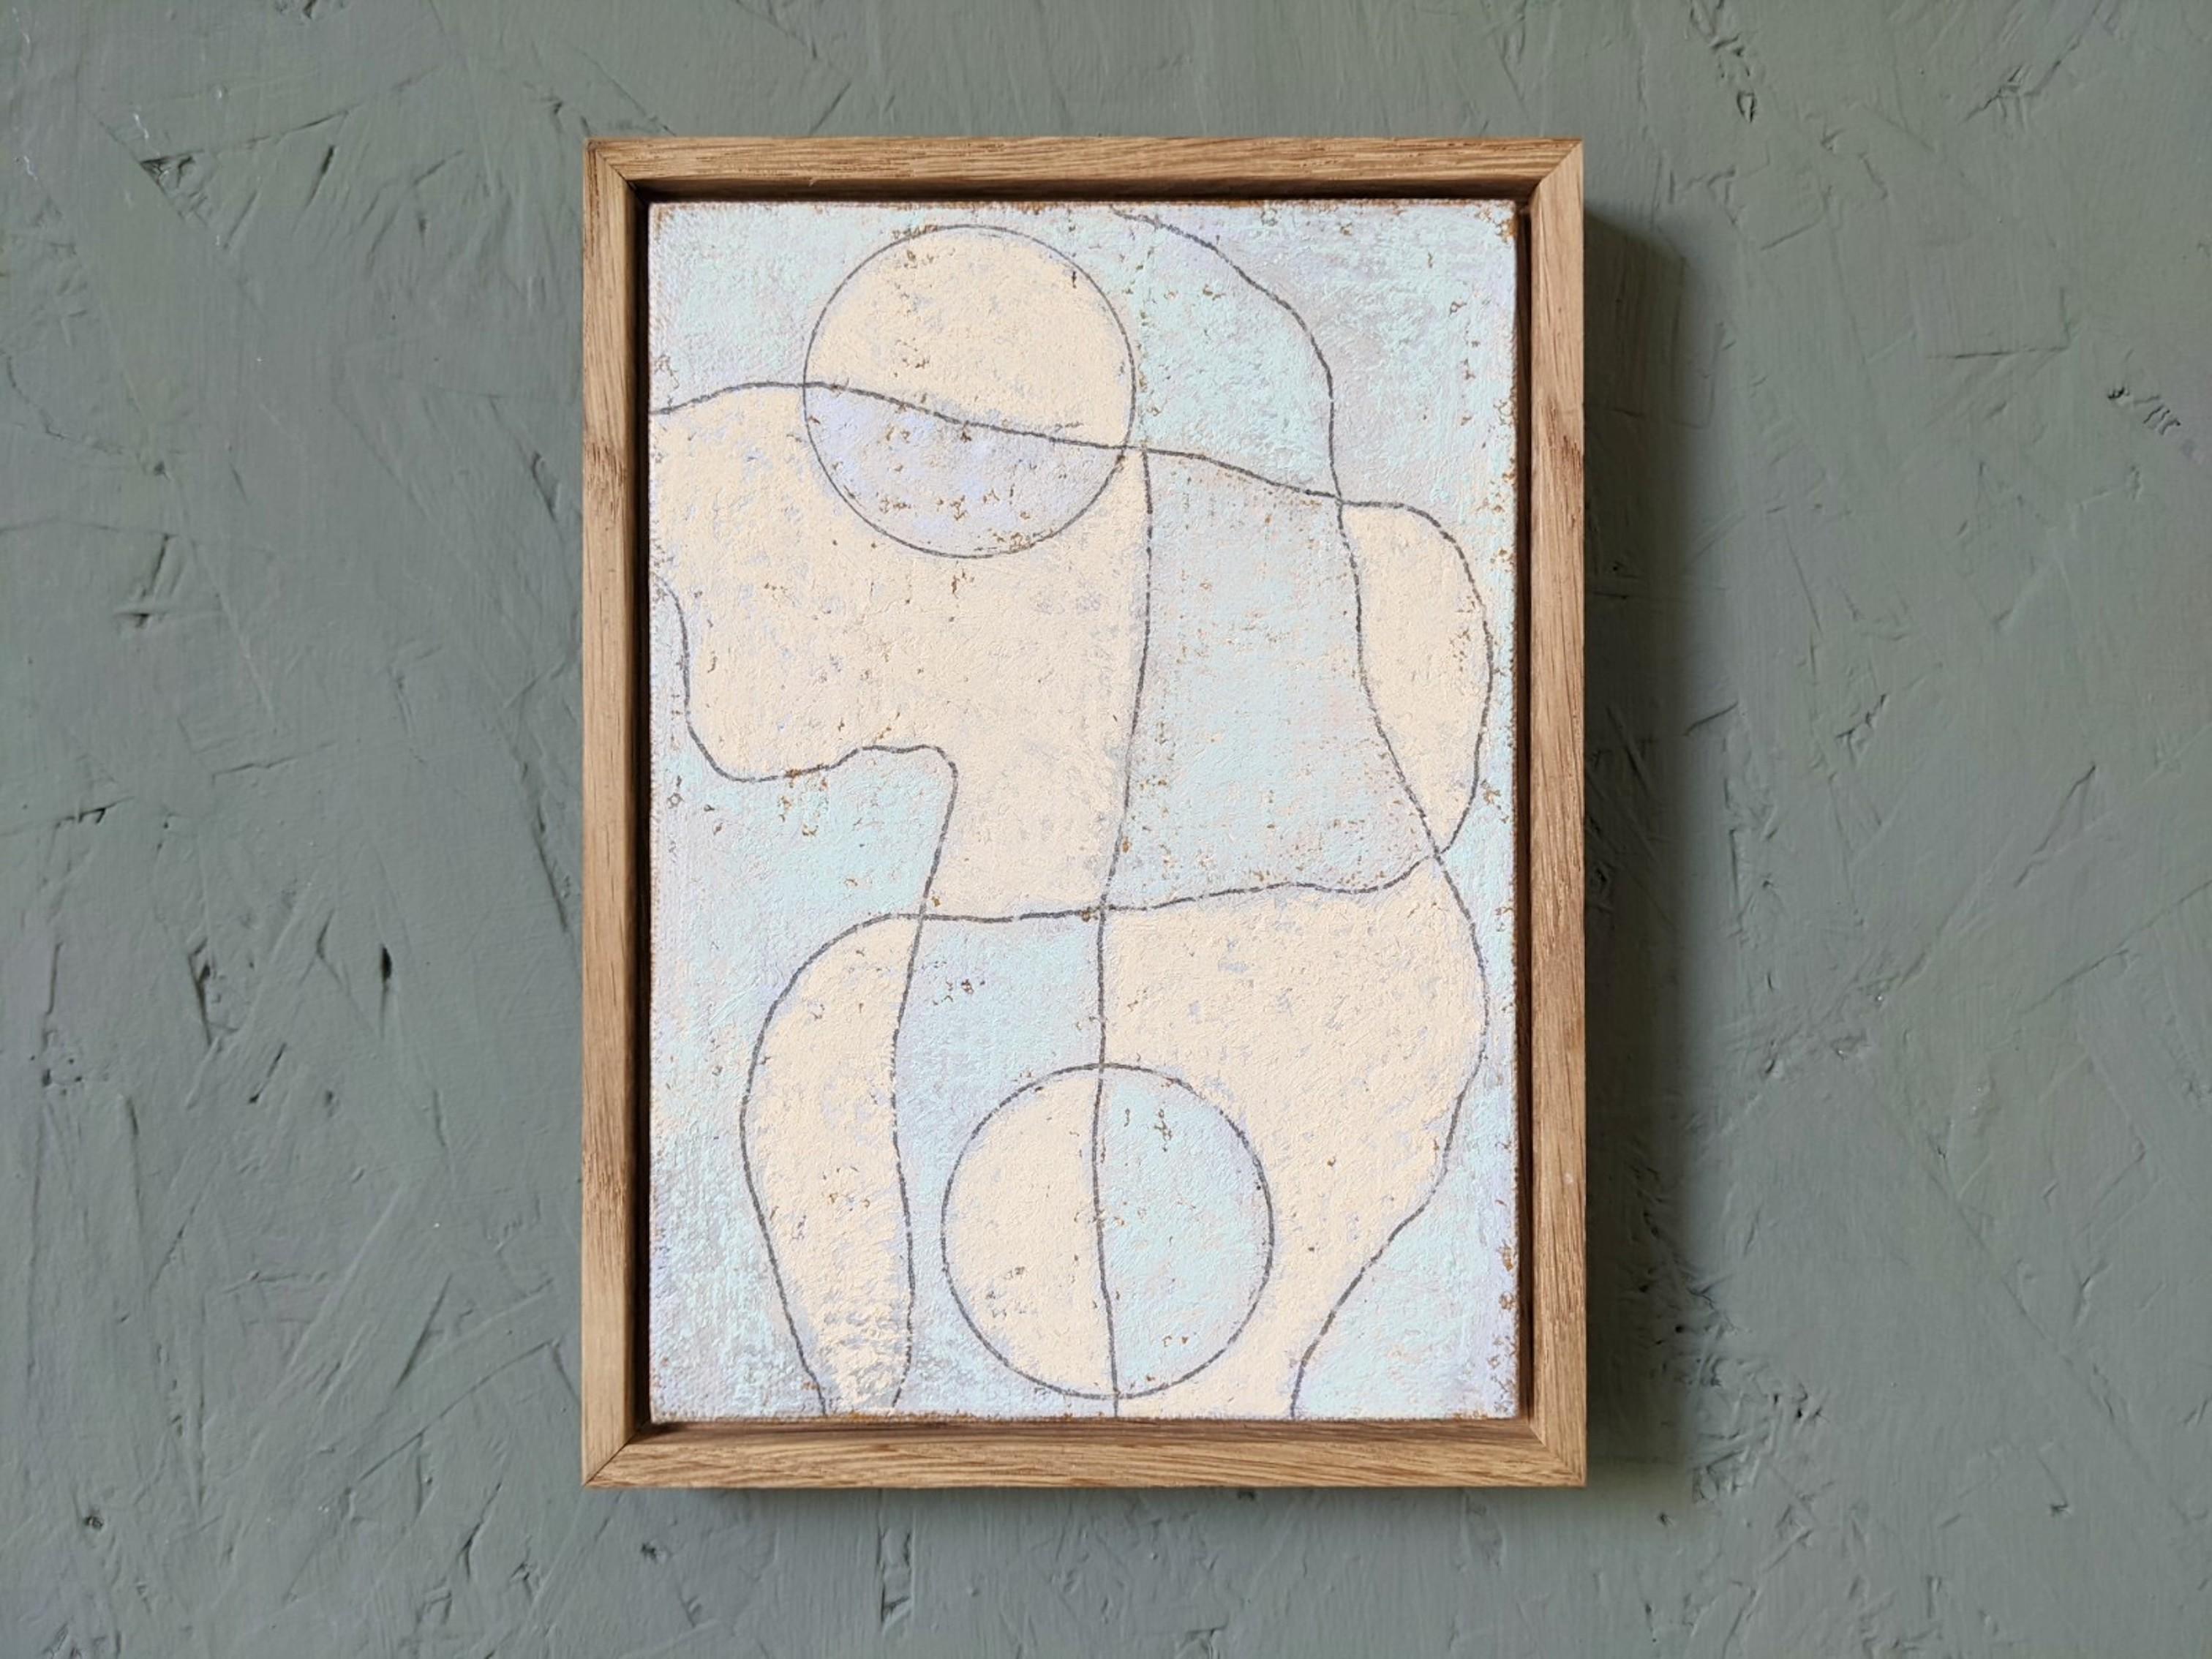 DESIRE LINES
Size: 20 x 15 cm (including frame)
oil stick and graphite on linen panel

A small but powerful abstract composition by British artist Lloyd Durling, painted with oil stick and graphite onto linen panel. Signed, titled and dated on